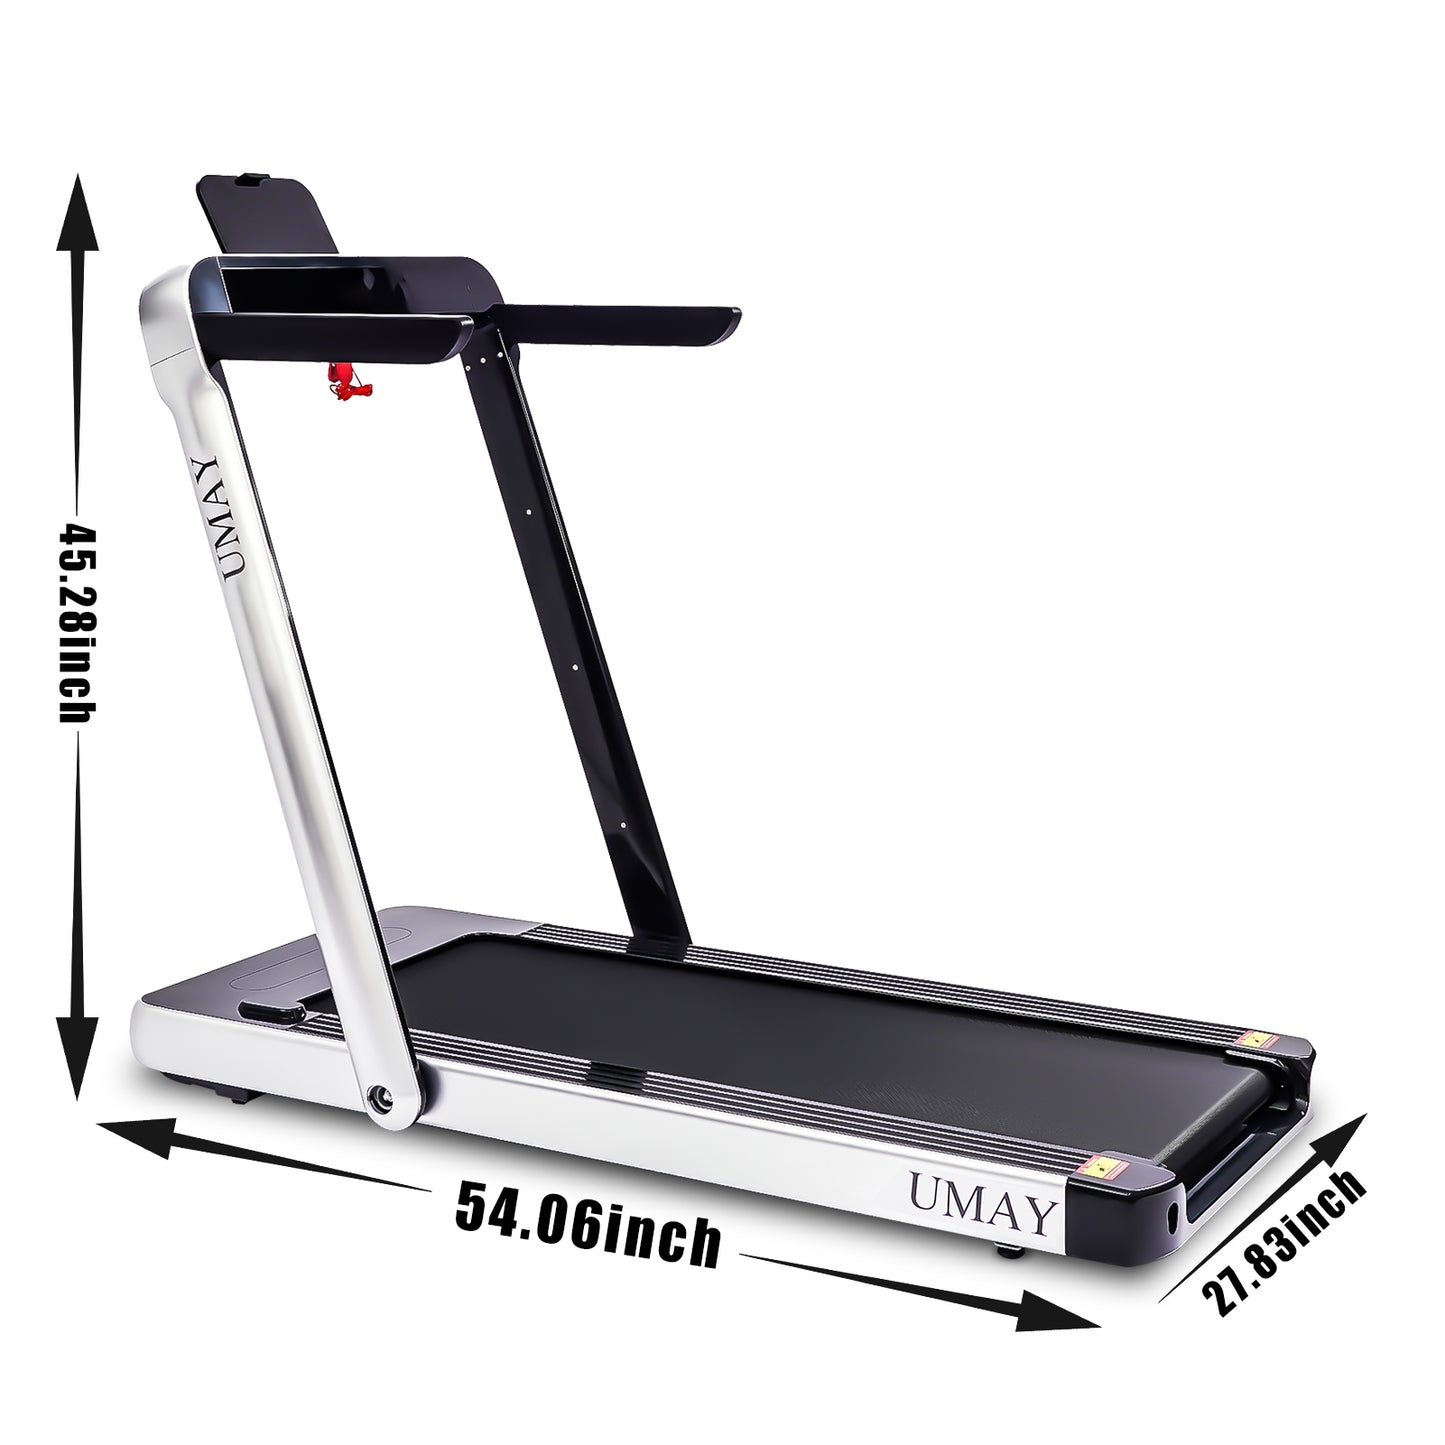 UMAY Folding Treadmill for Home with 4 inch LCD Display, 2.0 HP Motorized Running Machine with SPAX APP Control Bluetooth Speaker & phone Holder, Capacity 198 LBS